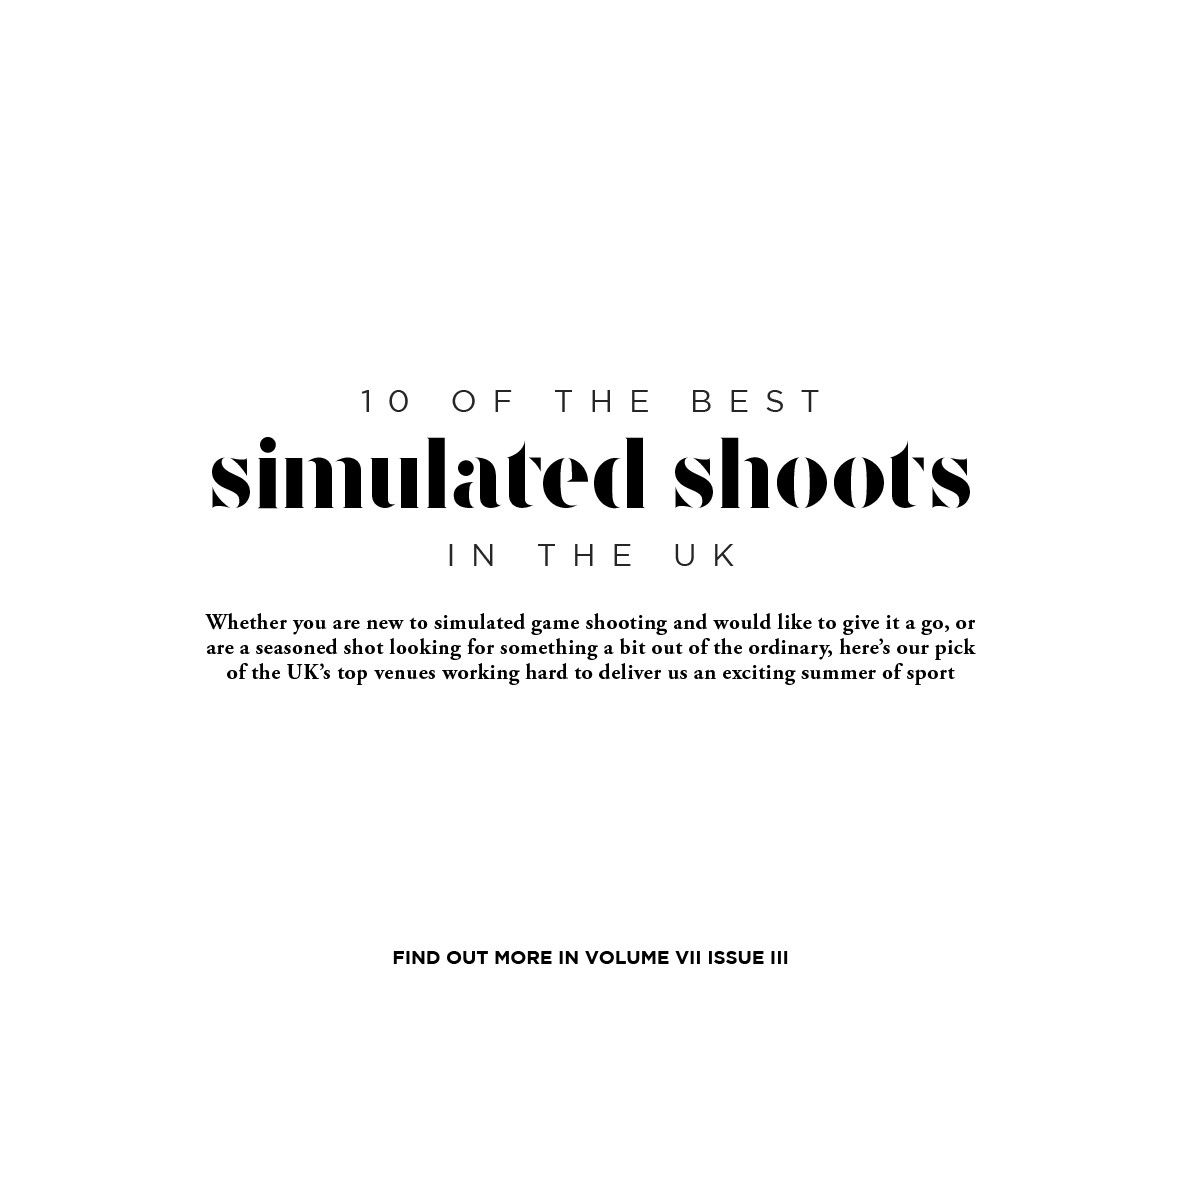 10 of the best simulated shoots in the UK Whether you are new to simulated game shooting and would like to give it a go, or are a seasoned shot, here's our pick of the UK's top venues working hard to deliver us an exciting summer of sport. Read more in the latest issue, out now